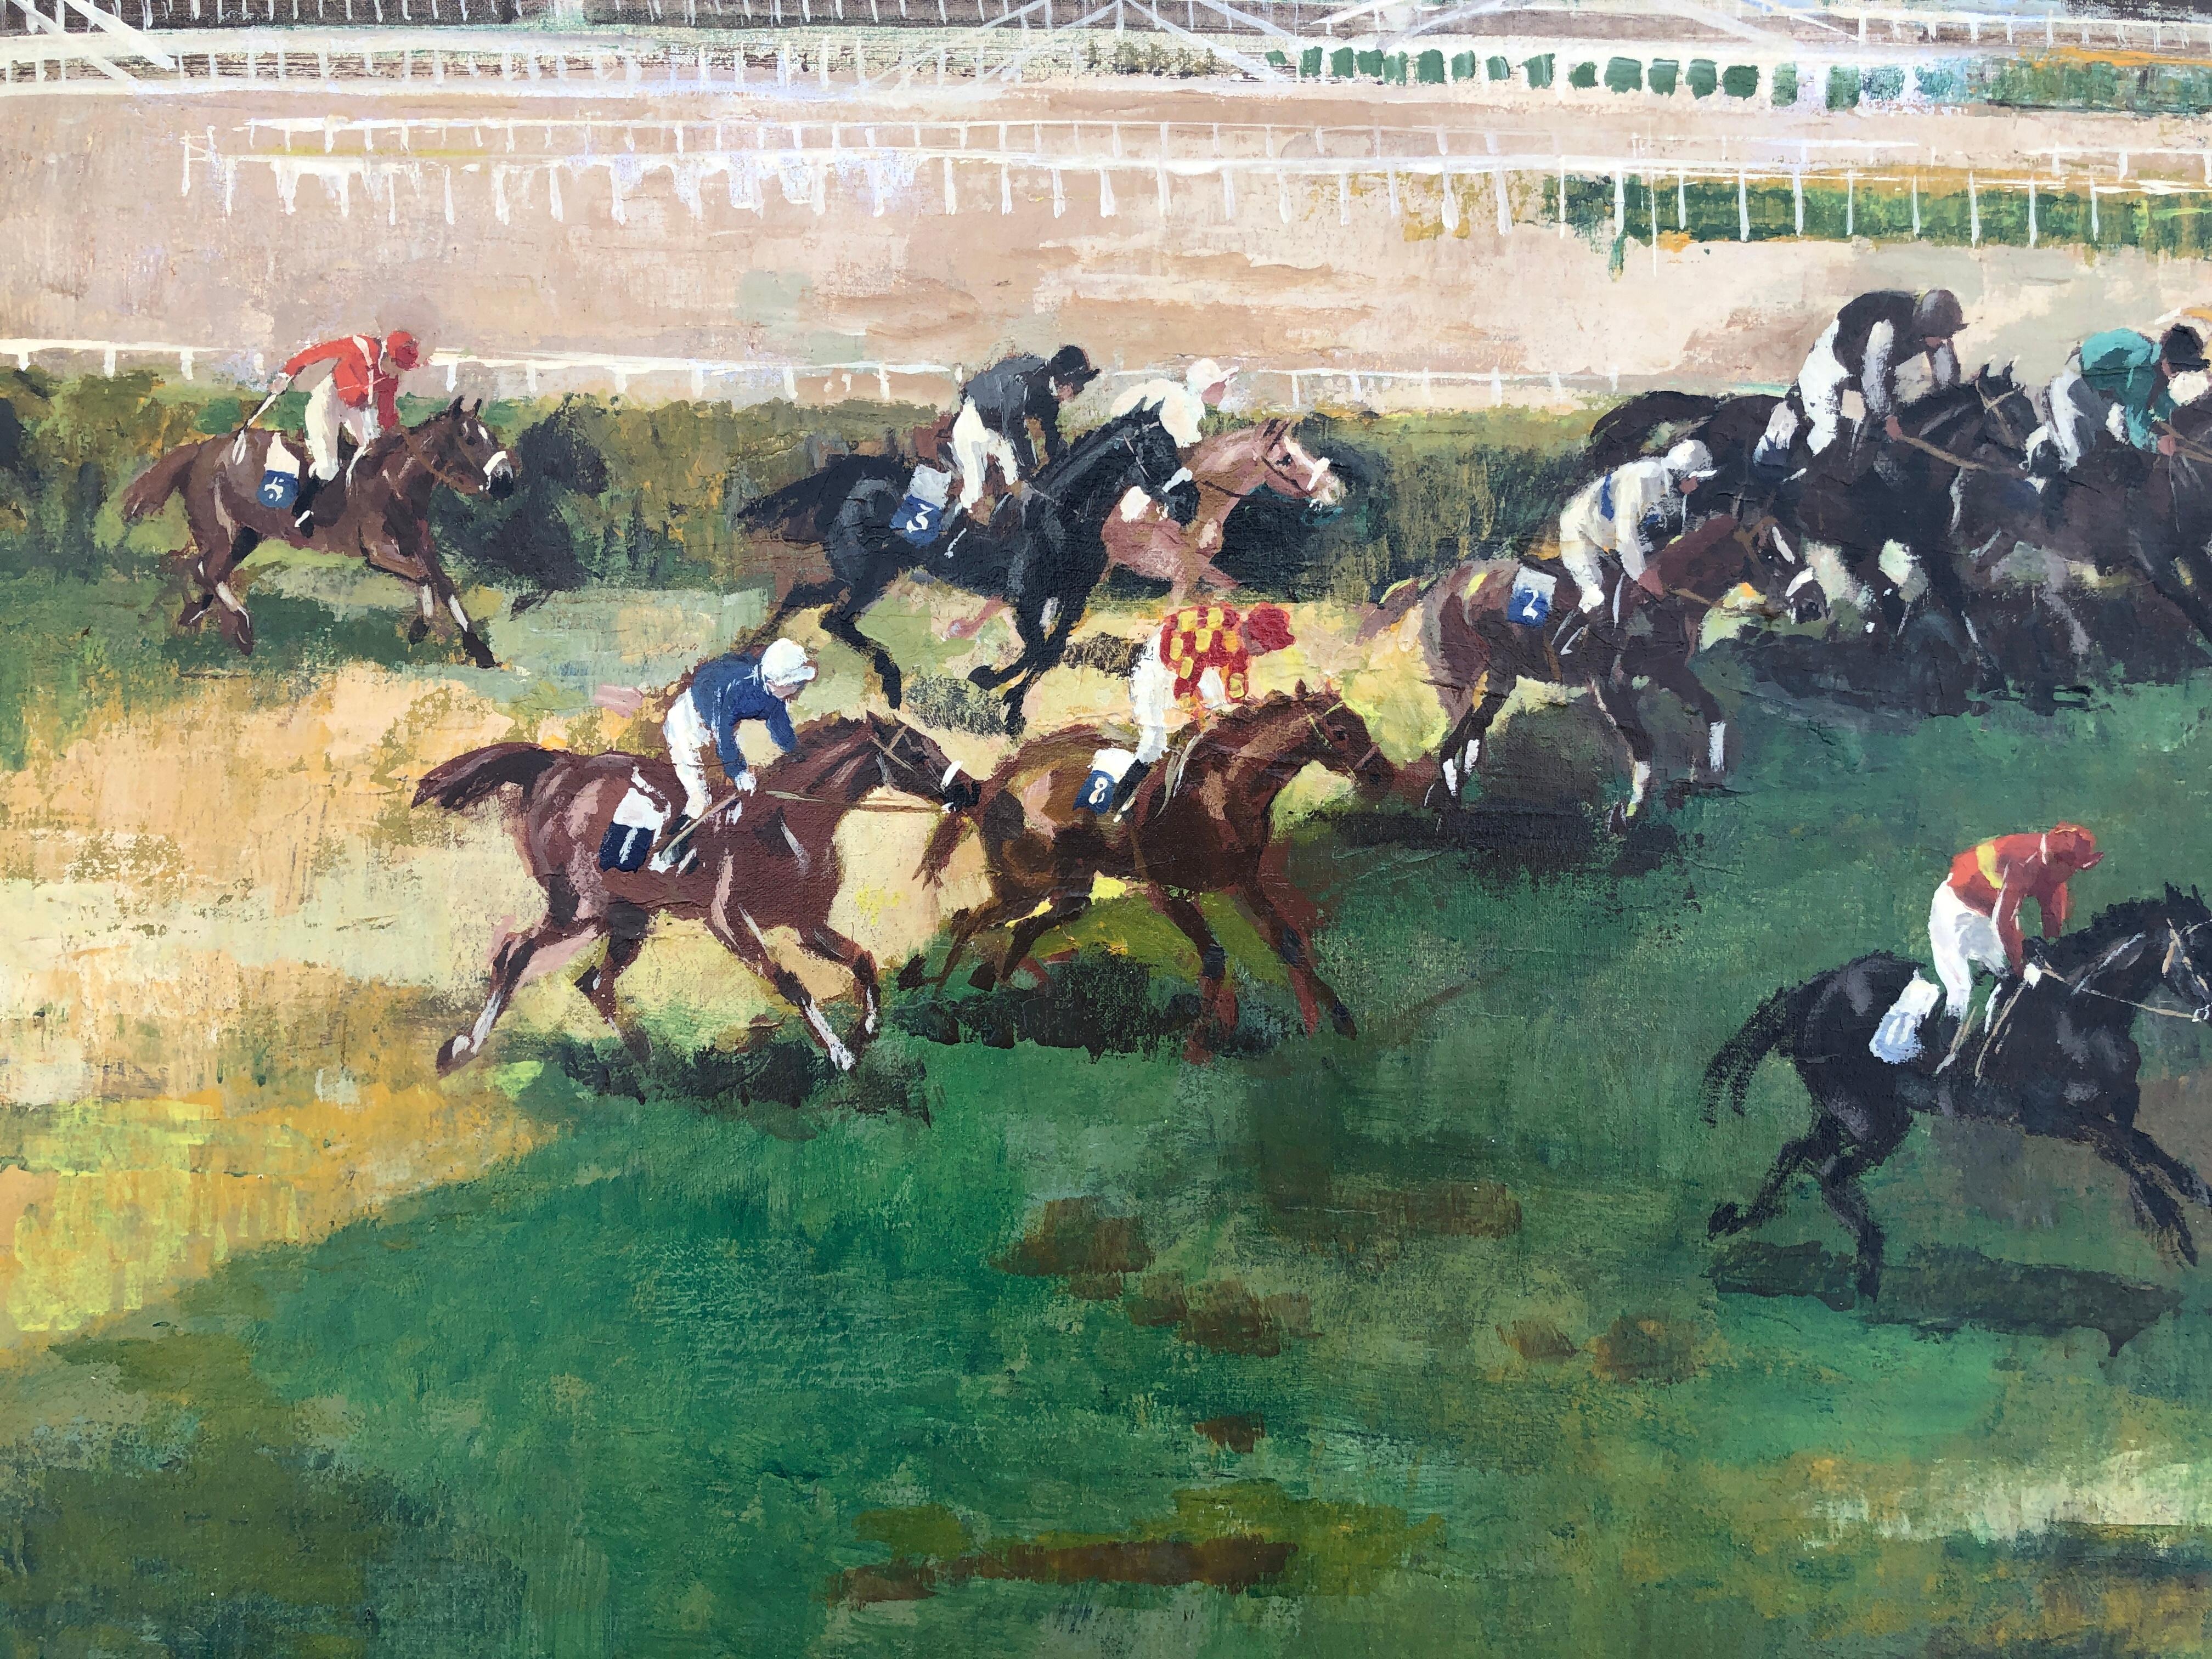 Horse race oil on canvas painting - Gray Animal Painting by Jose Luis Florit Rodero